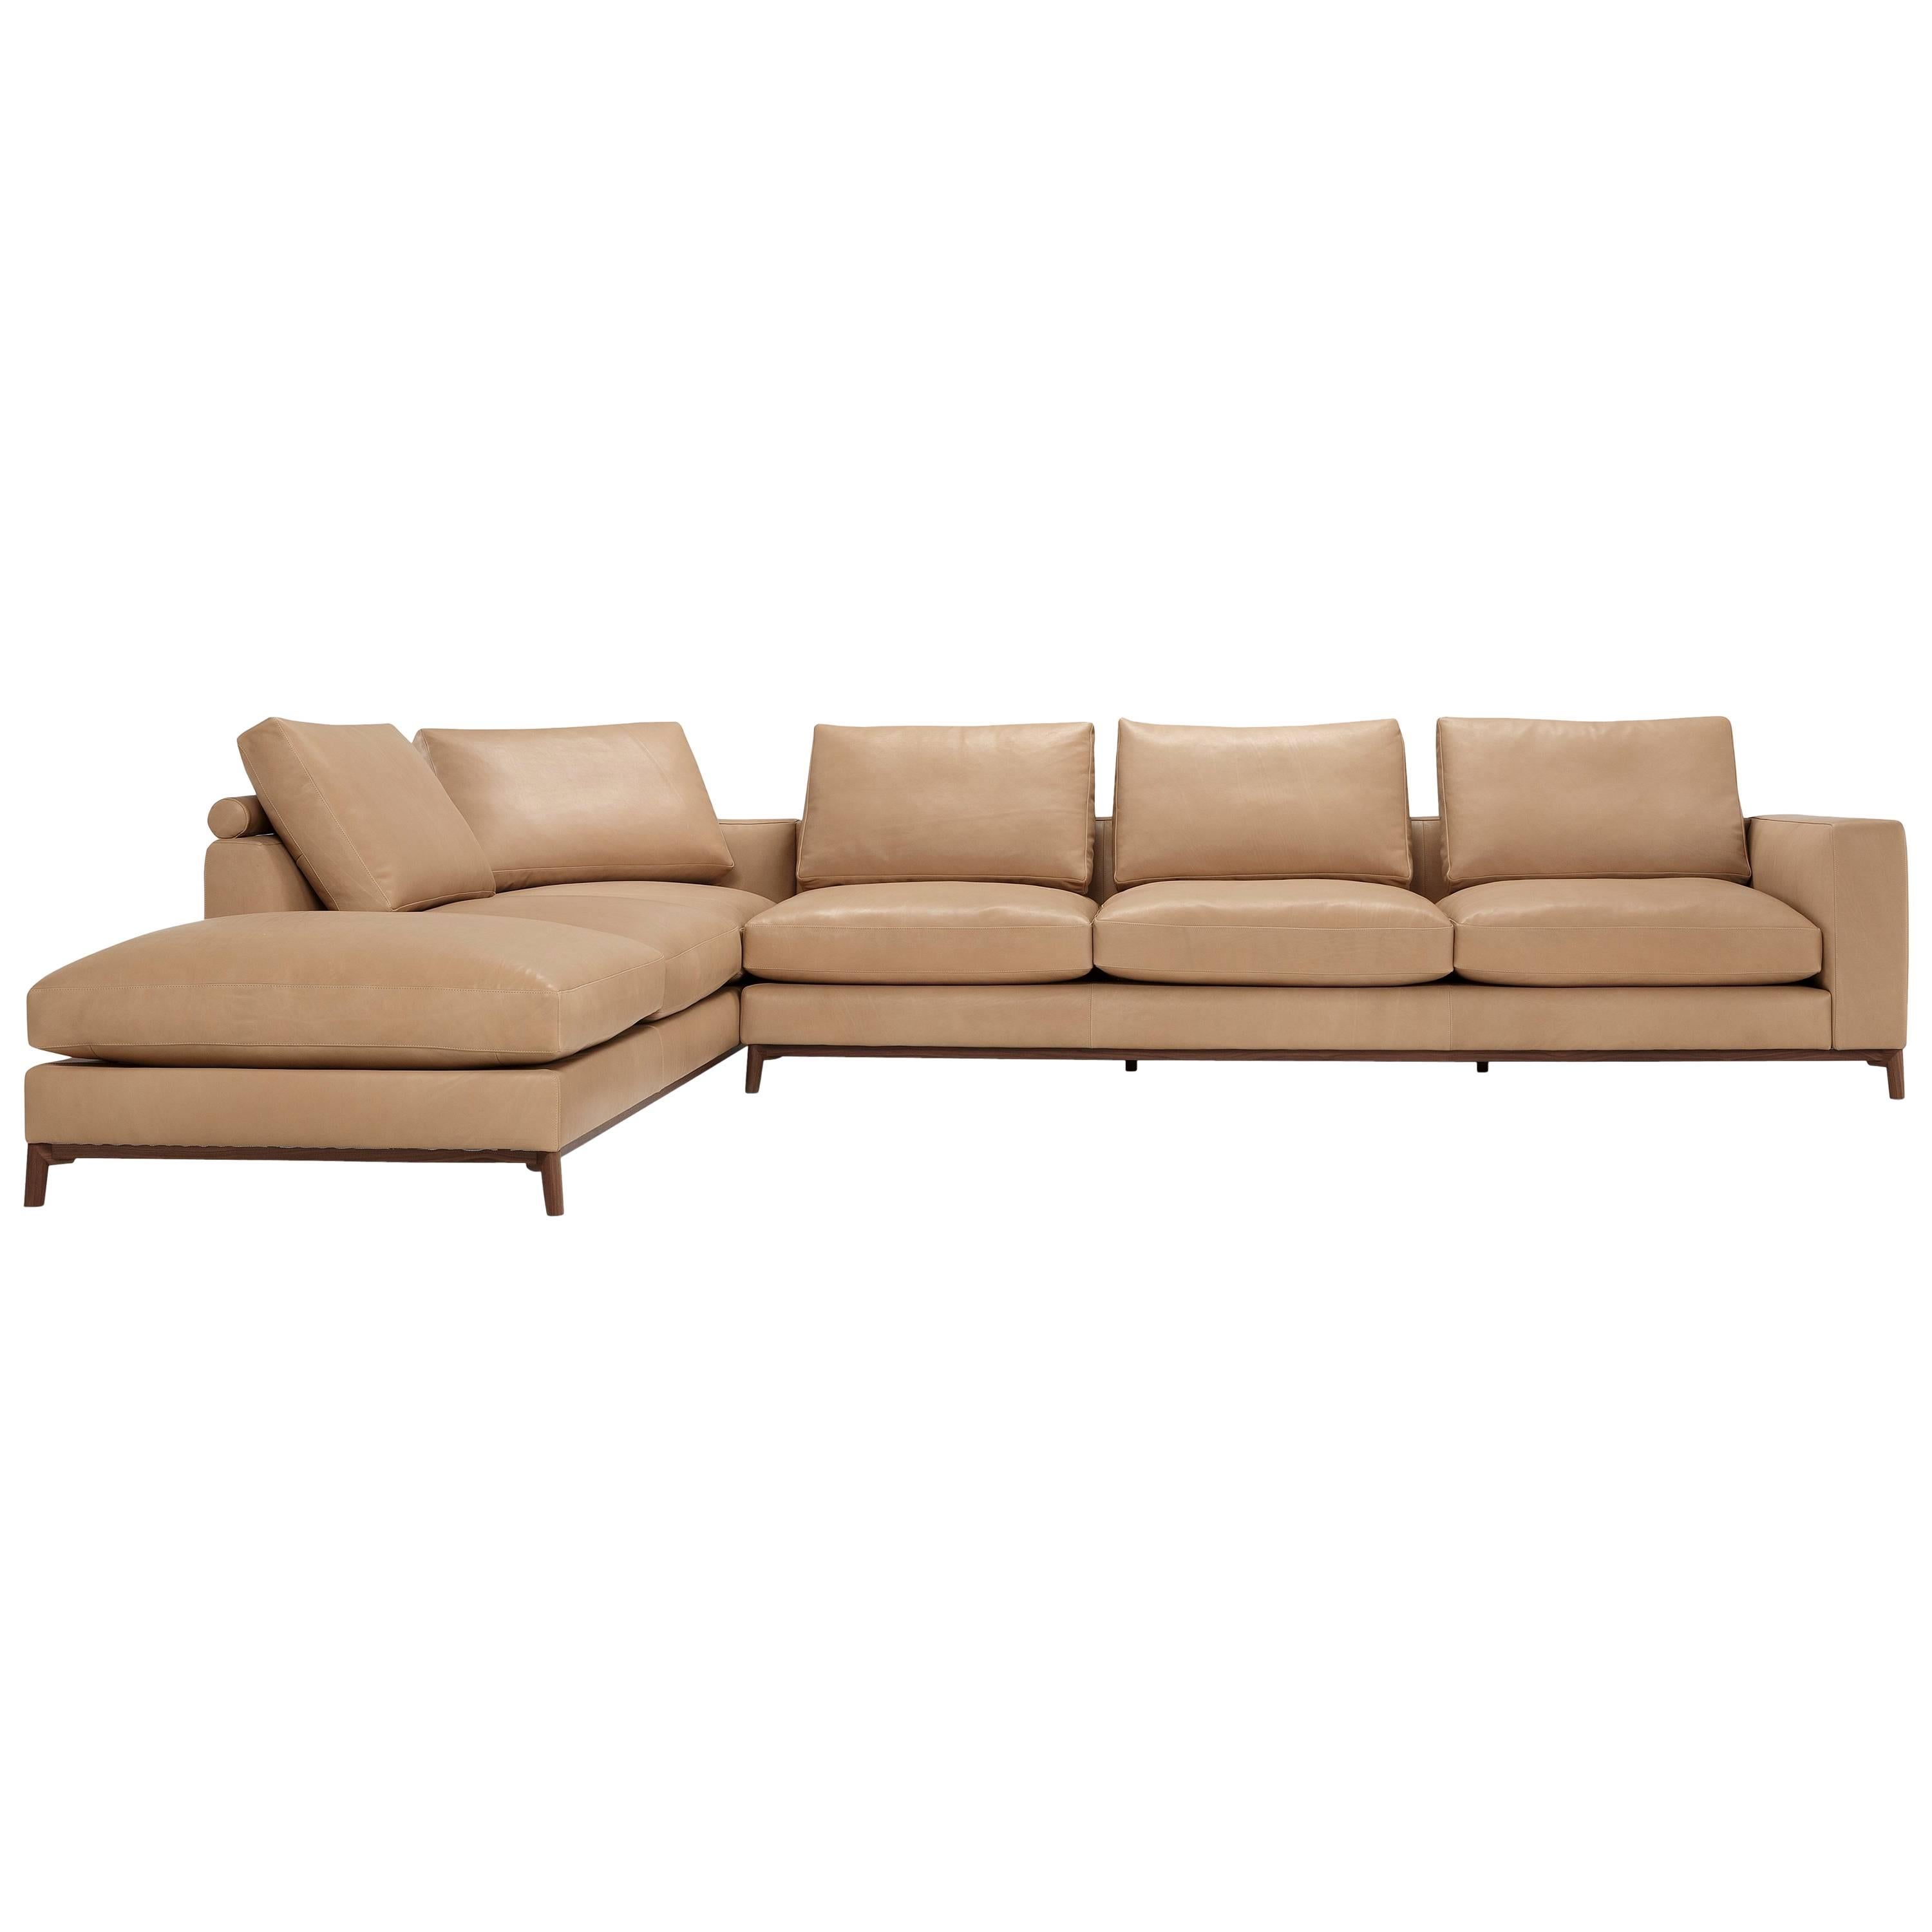 Dorsey Composition Sofa in Light Tan by Amura Lab For Sale